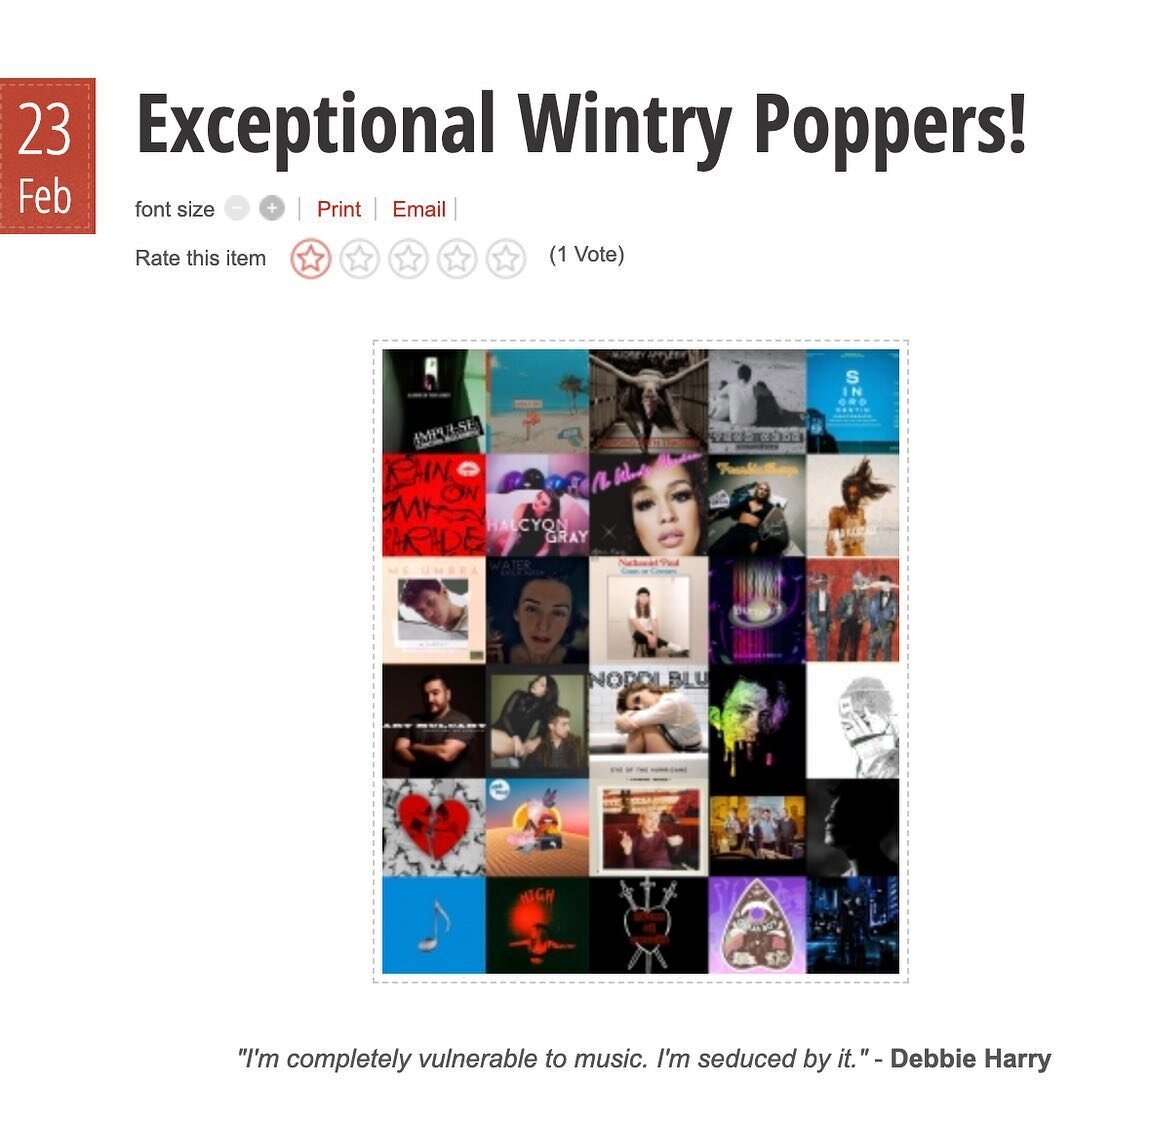 So excited to announce that my song, &ldquo;Dancing with Tragedy&rdquo; was featured on @rockeramag&rsquo;s &lsquo;Exceptional Wintry Poppers&rsquo; playlist!

They posted the music video on their blog among a talented many other artists ❤️ 

Click t